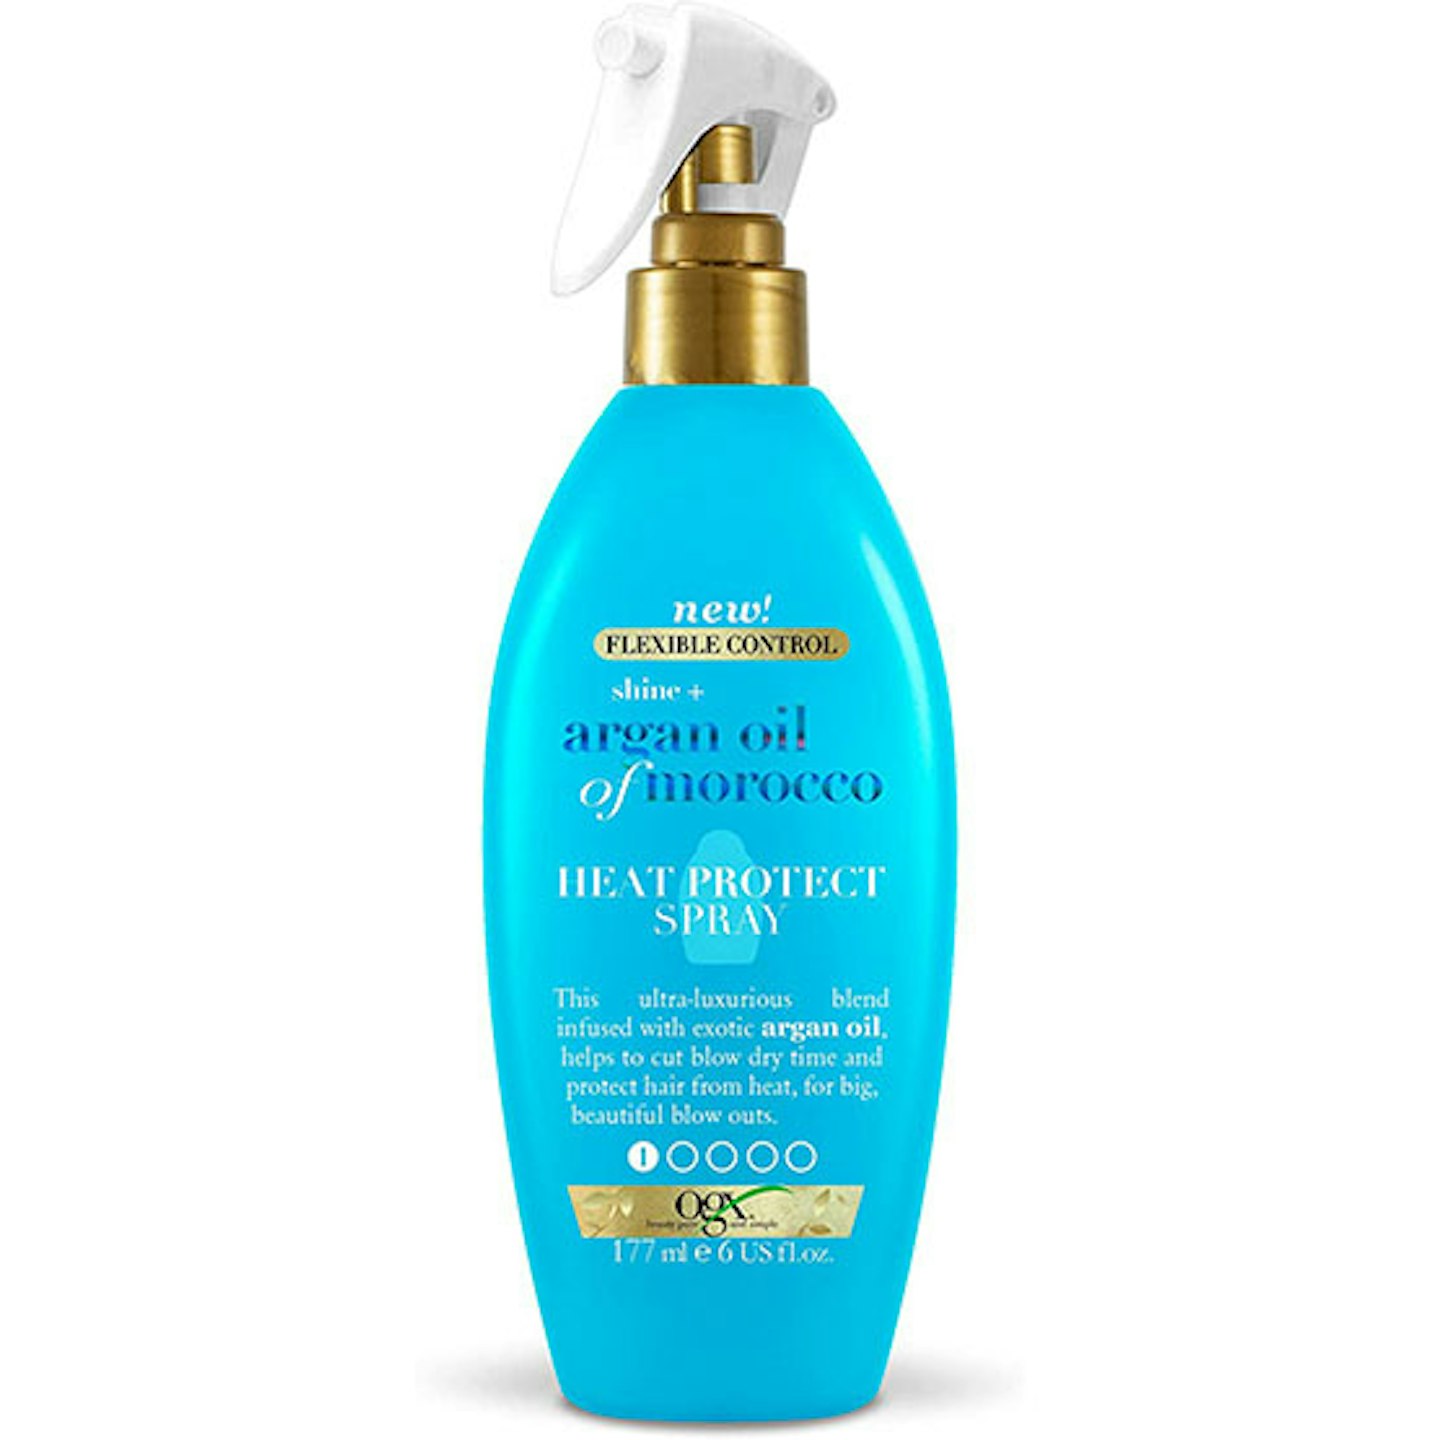 OGX Argan Oil of Morocco heat protection and blow dry spray for hair